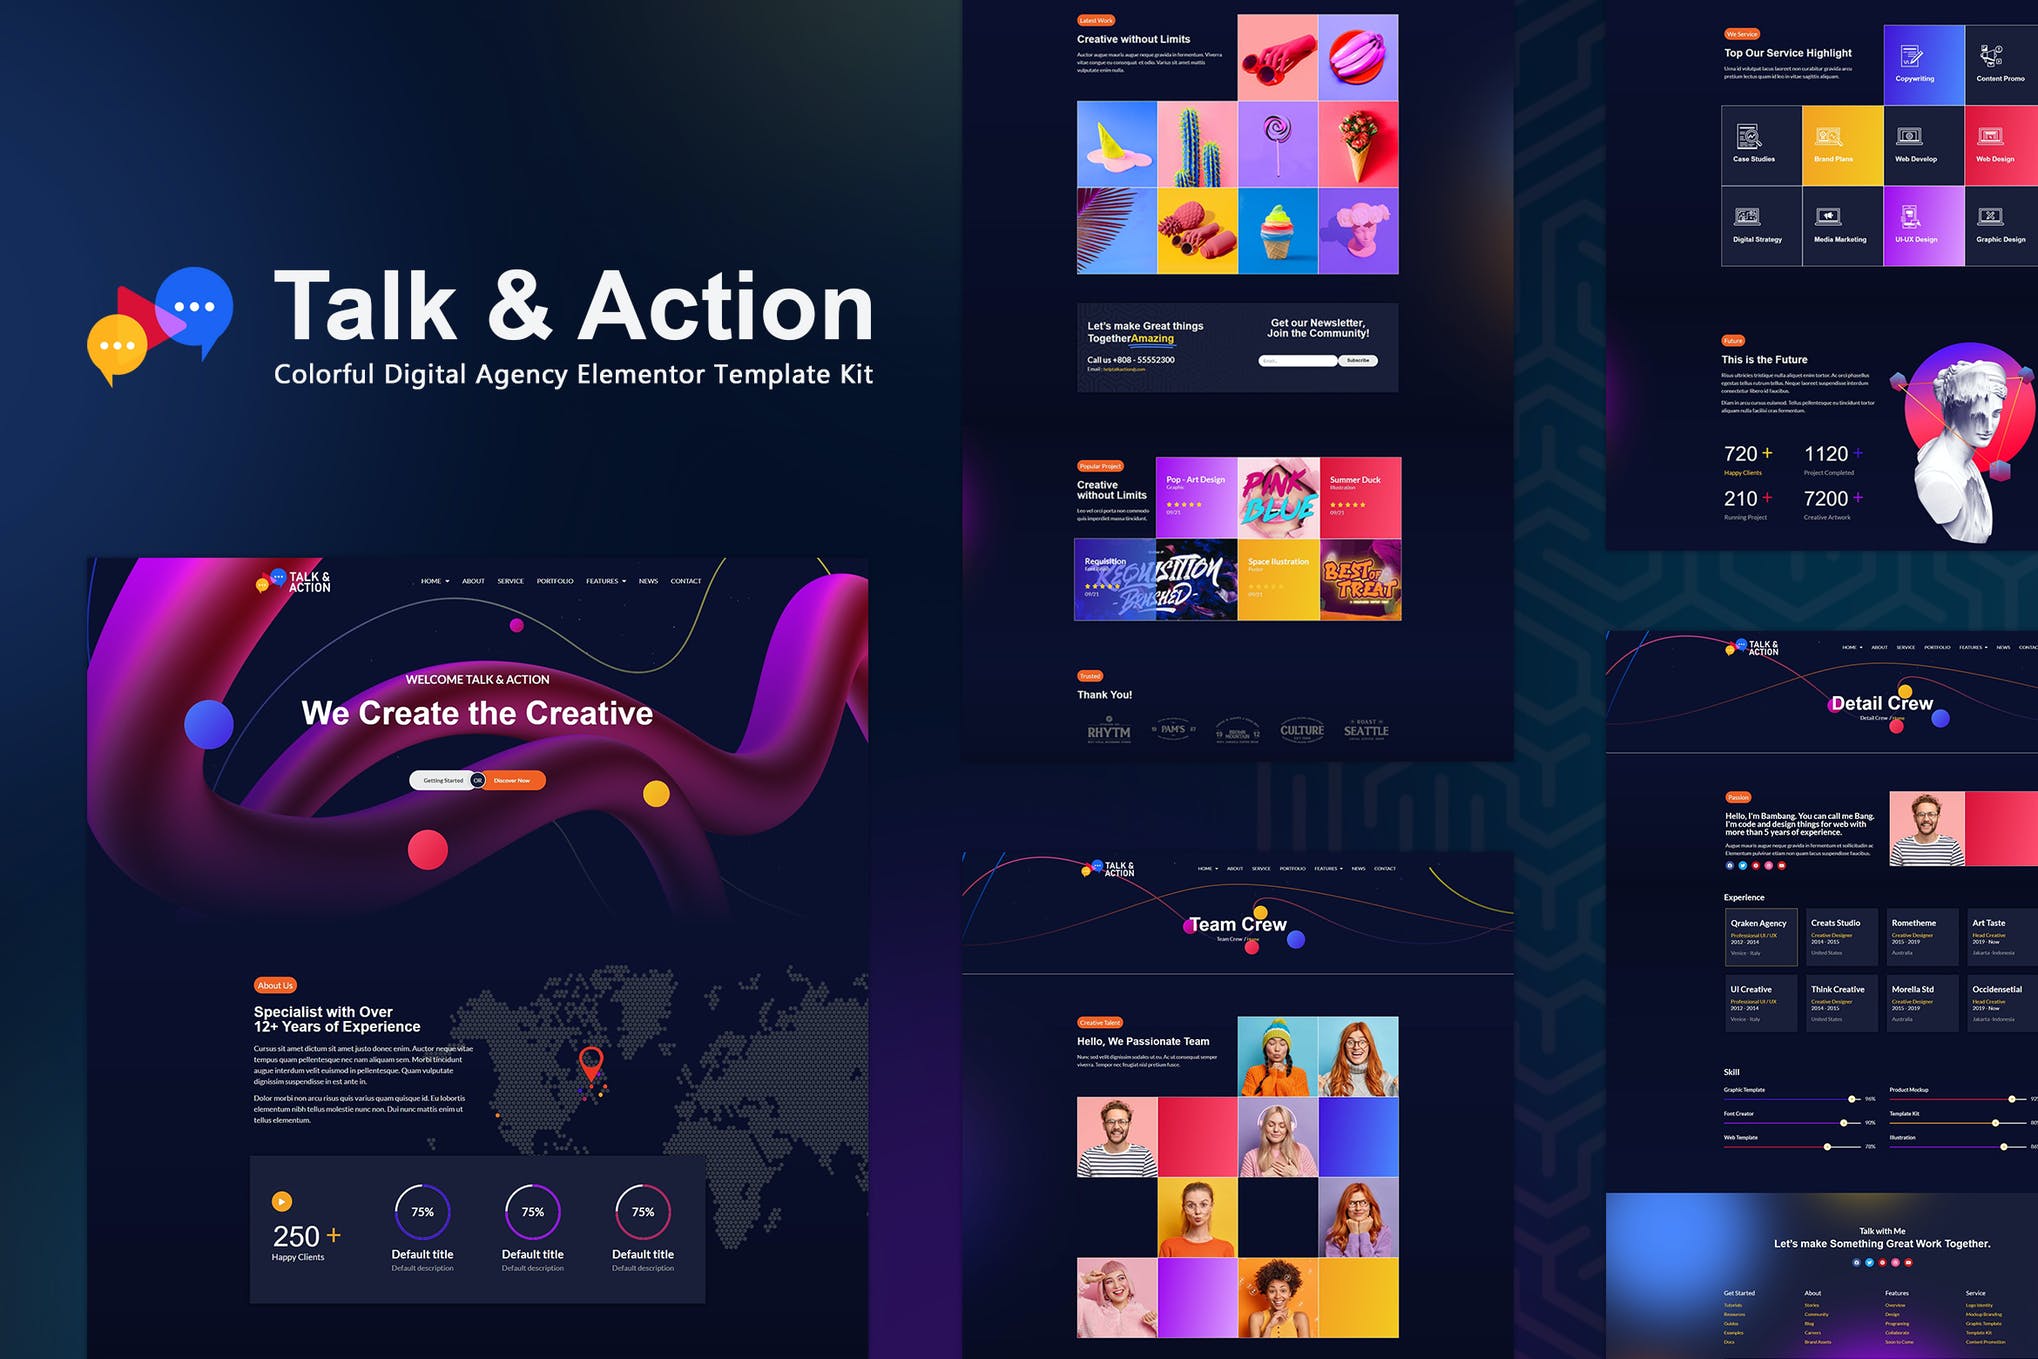 Talk - Action - Colorful Digital Agency Elementor Template Kit